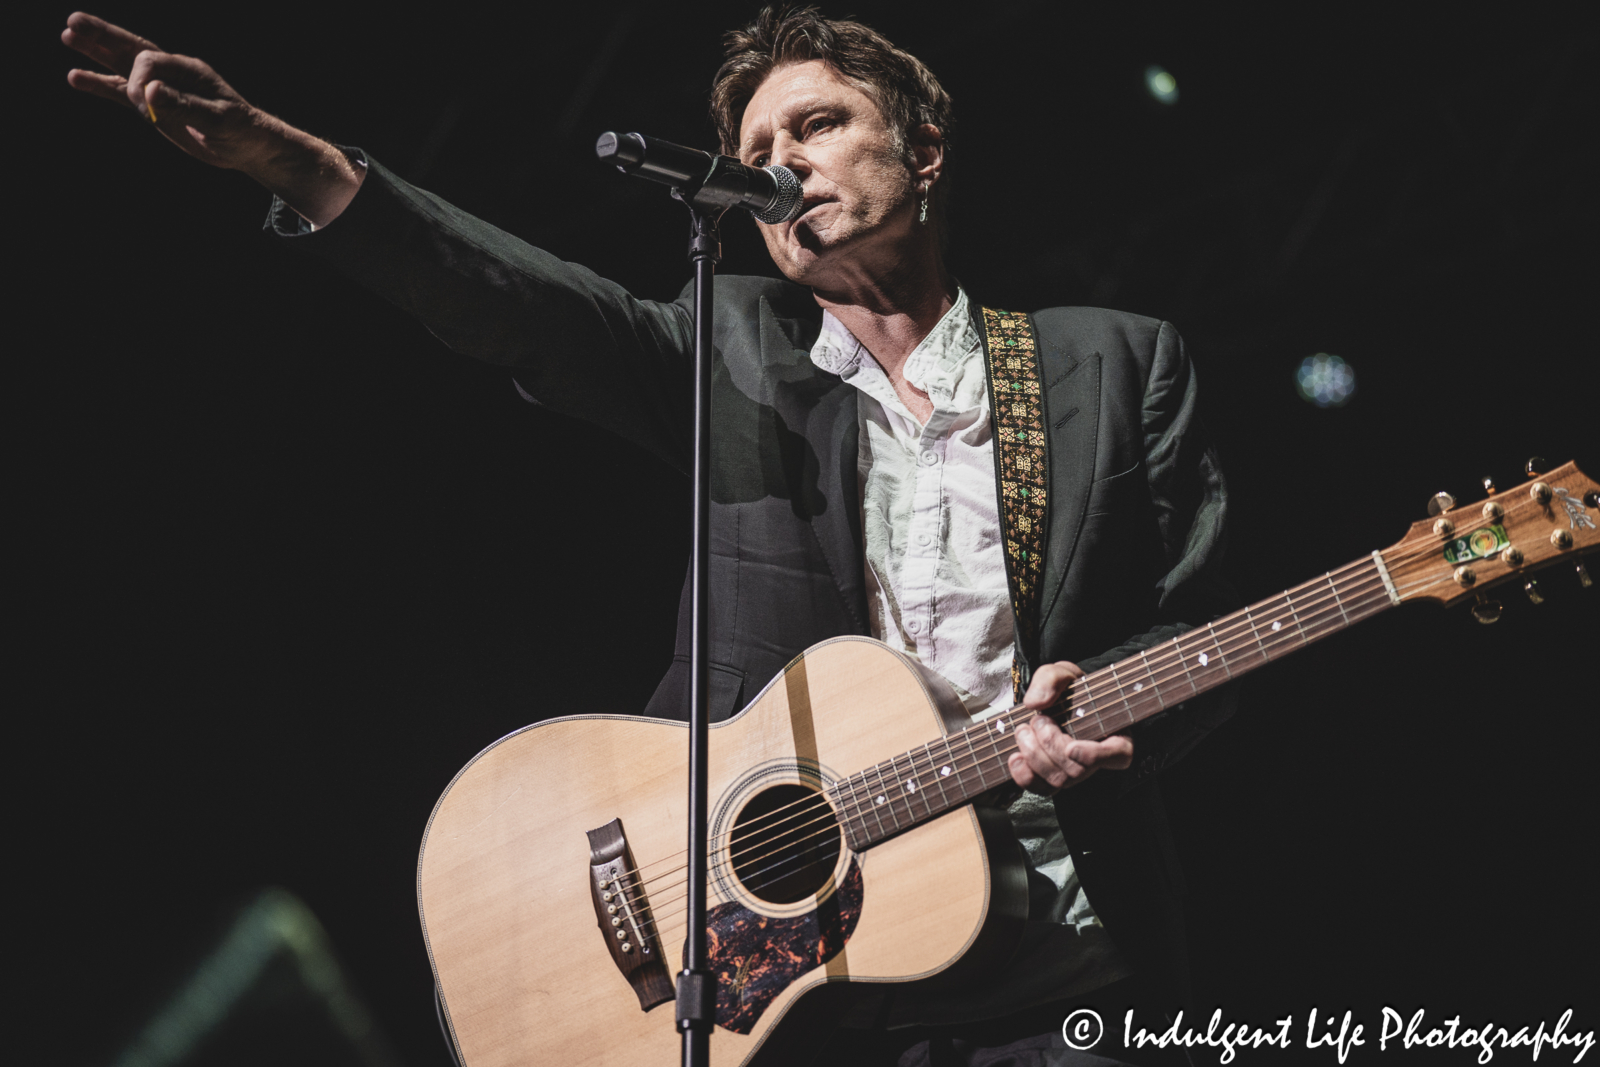 John Waite playing the acoustic guitar live during his "Missing You" 40th Anniversary concert at Ameristar Casino's Star Pavilion in Kansas City, MO on December 8, 2023.